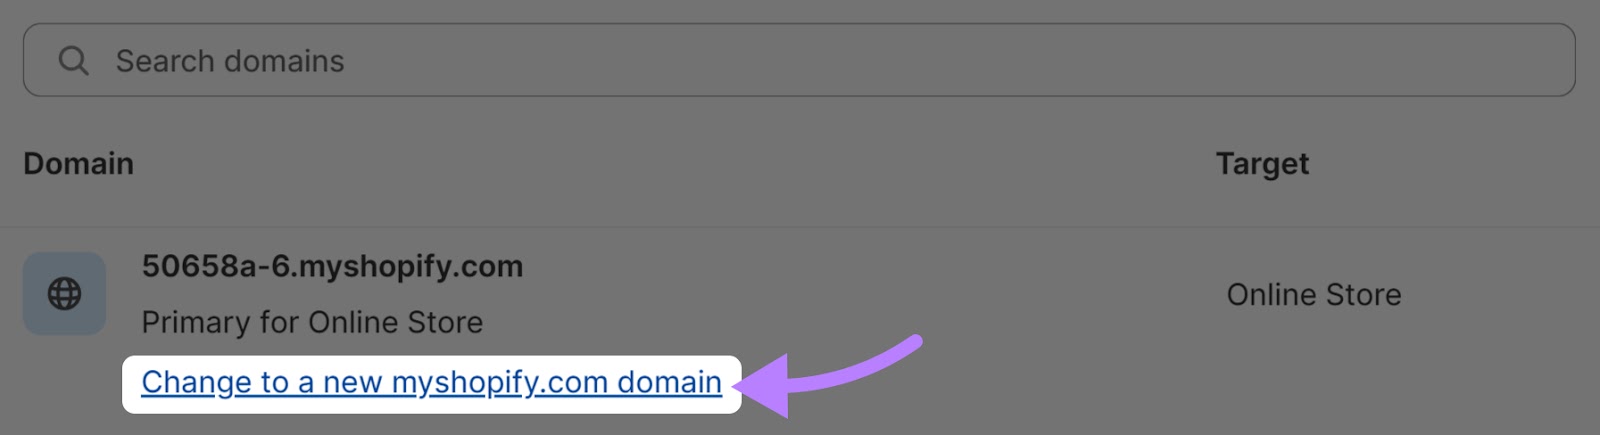 “Change to a caller   myshopify.com domain” nexus  highlighted successful  Shopify admin